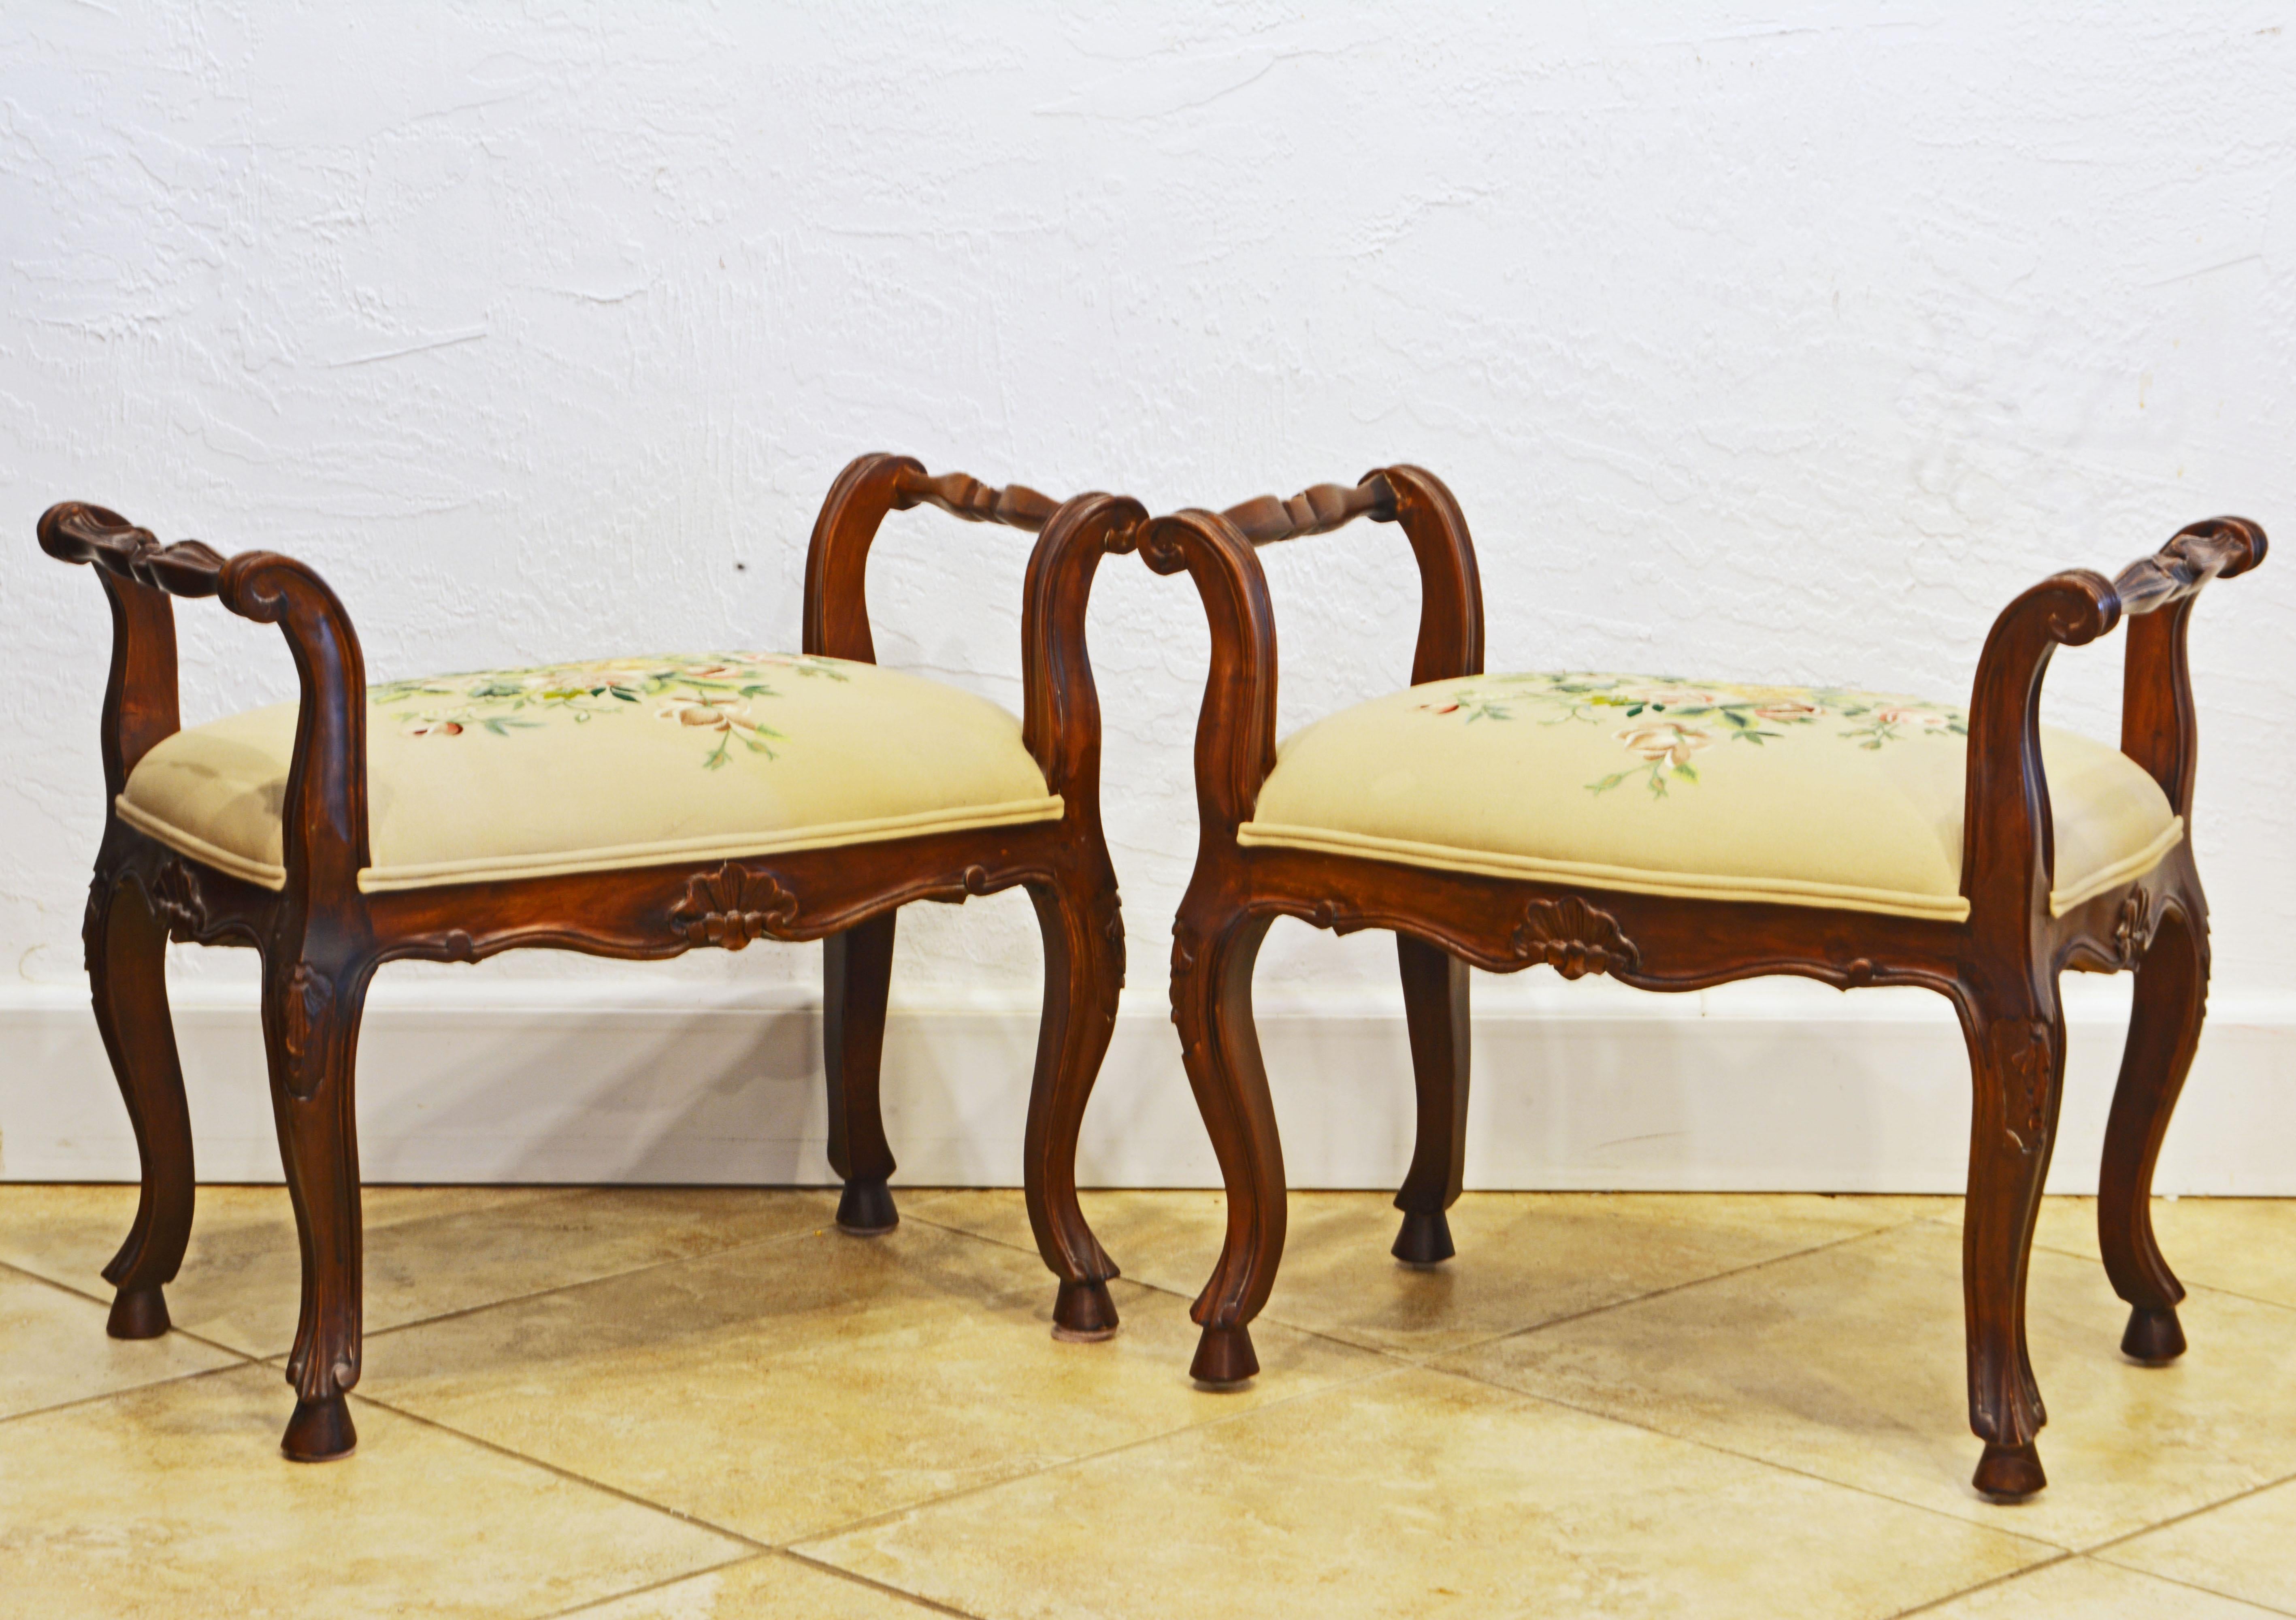 This fetching pair of French Provincial carved walnut benches, dating to the mid 20th century feature attractively curved frames and aprons. The seats are tastefully upholstered and covered with silk embroidered fabric.